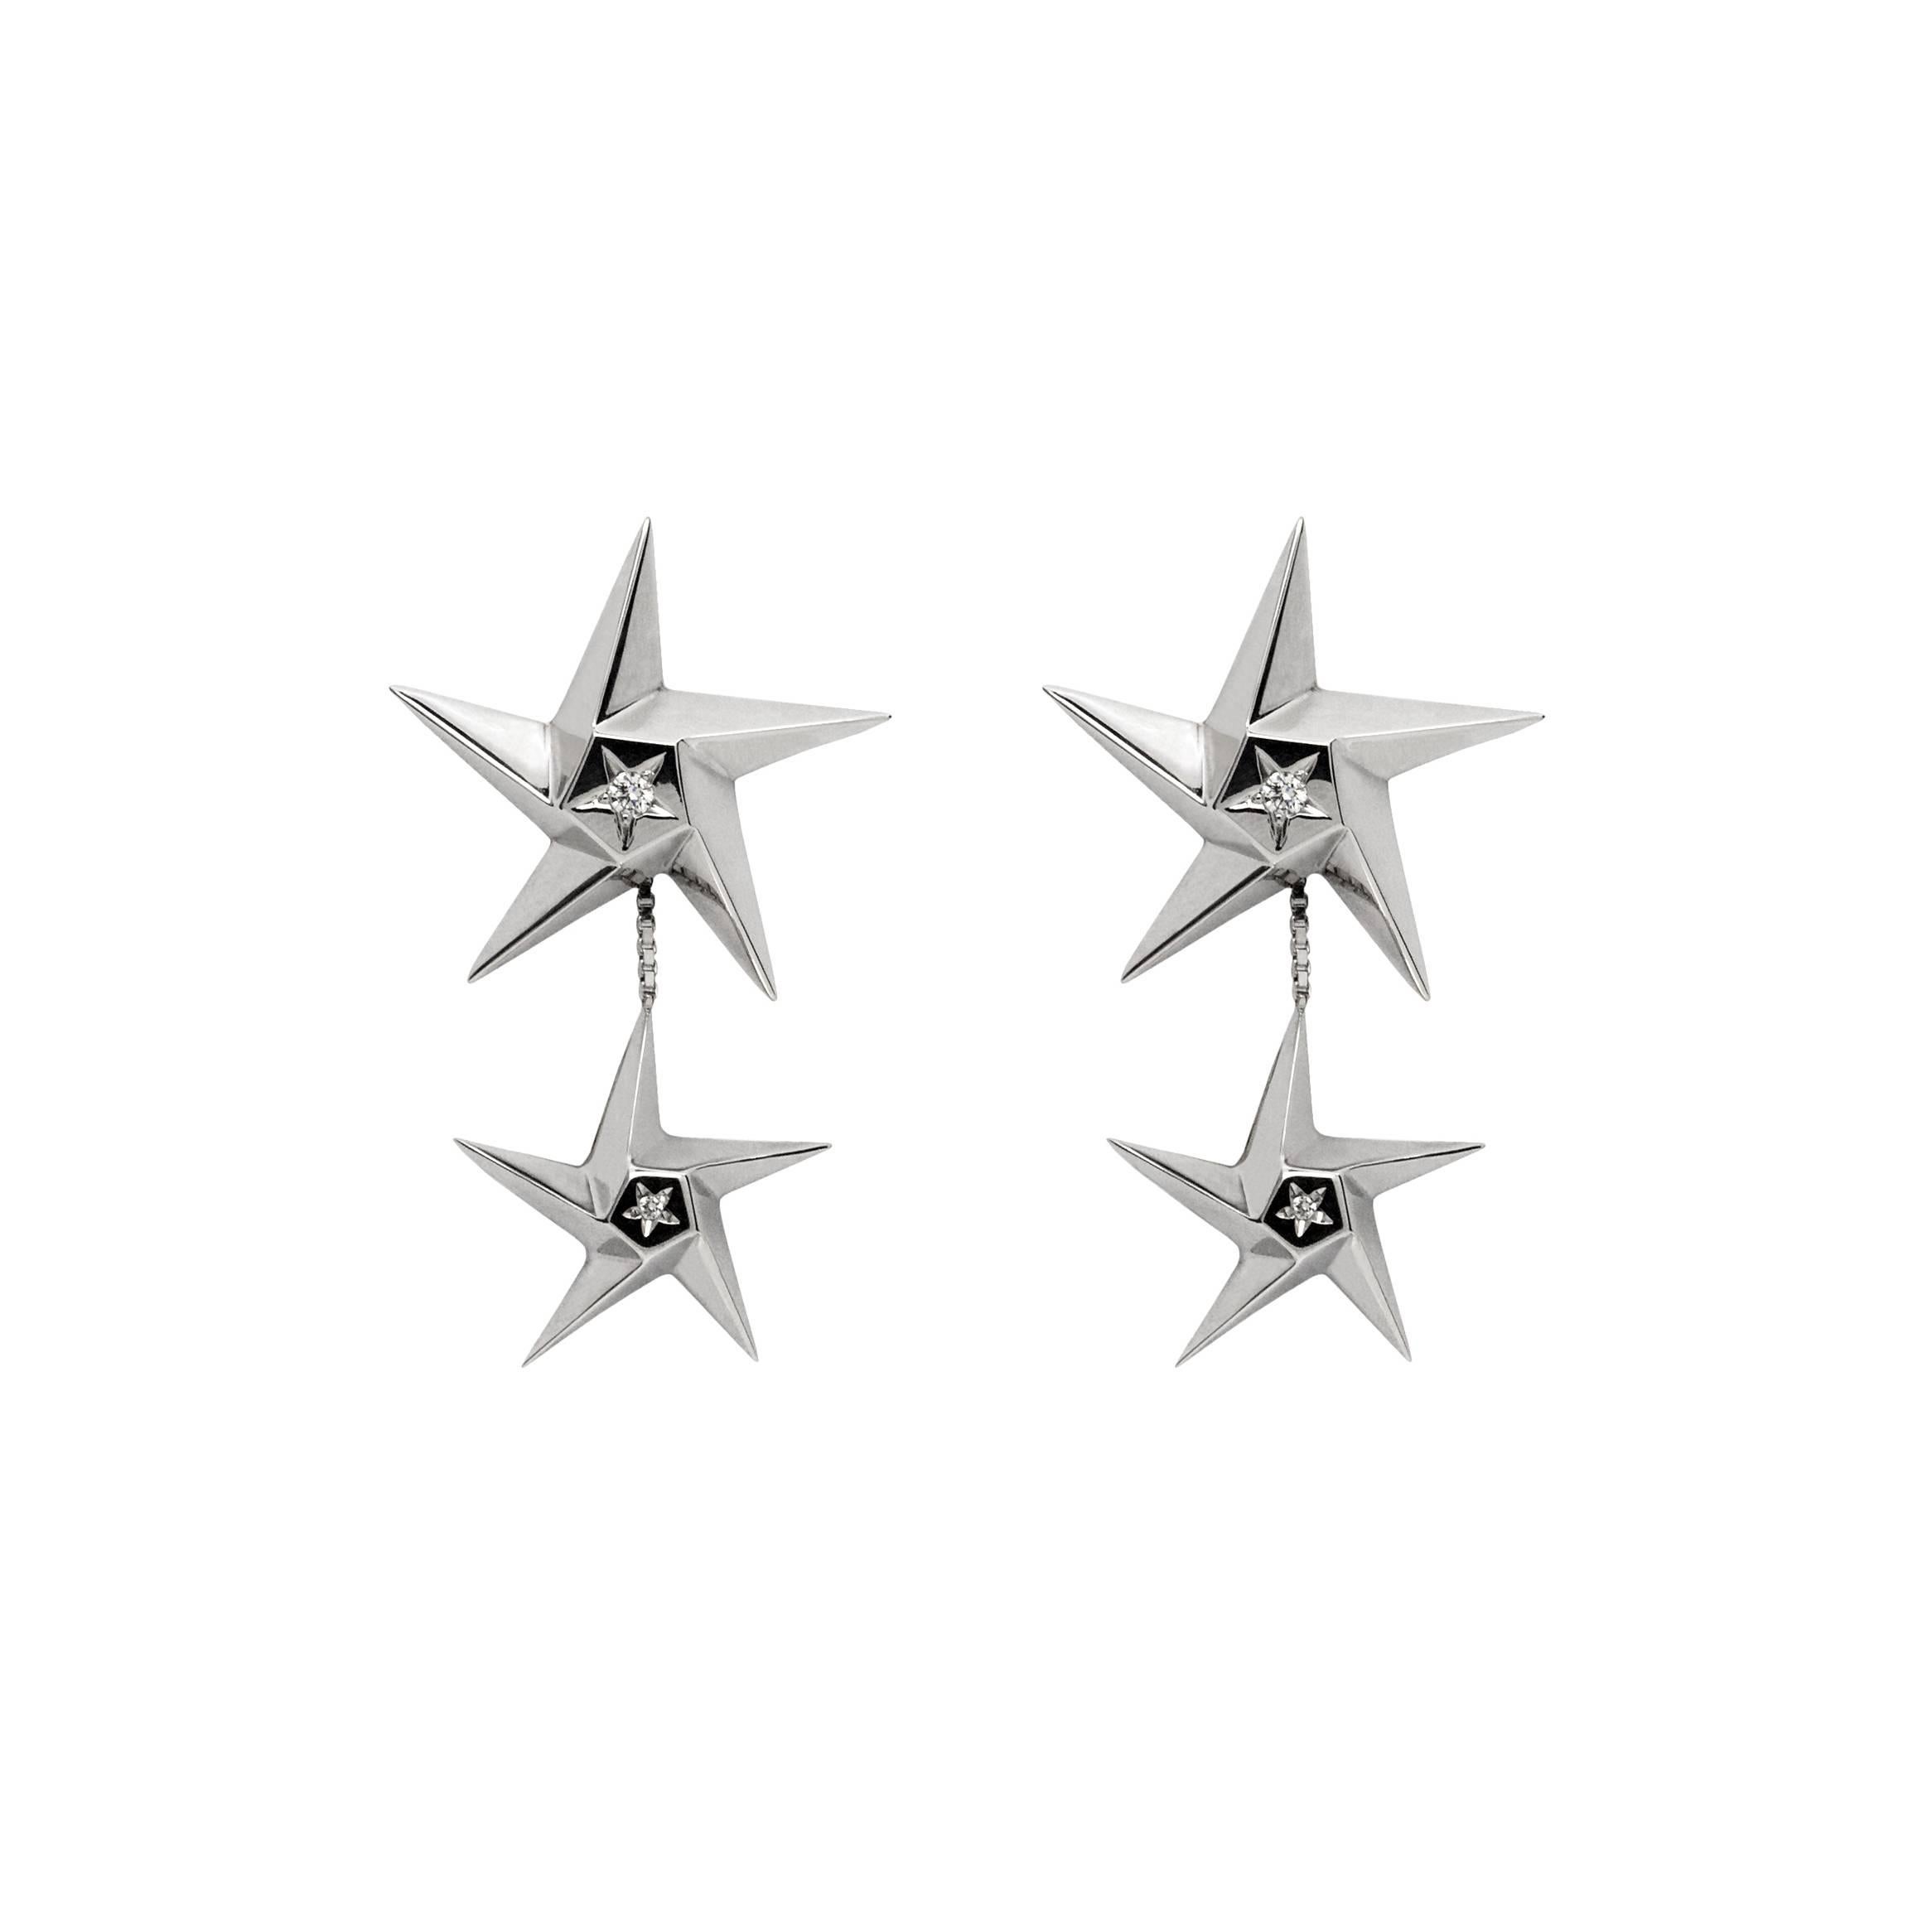 Daou Diamond Star Earrings in White Gold with Convertible Star Drop Earrings For Sale